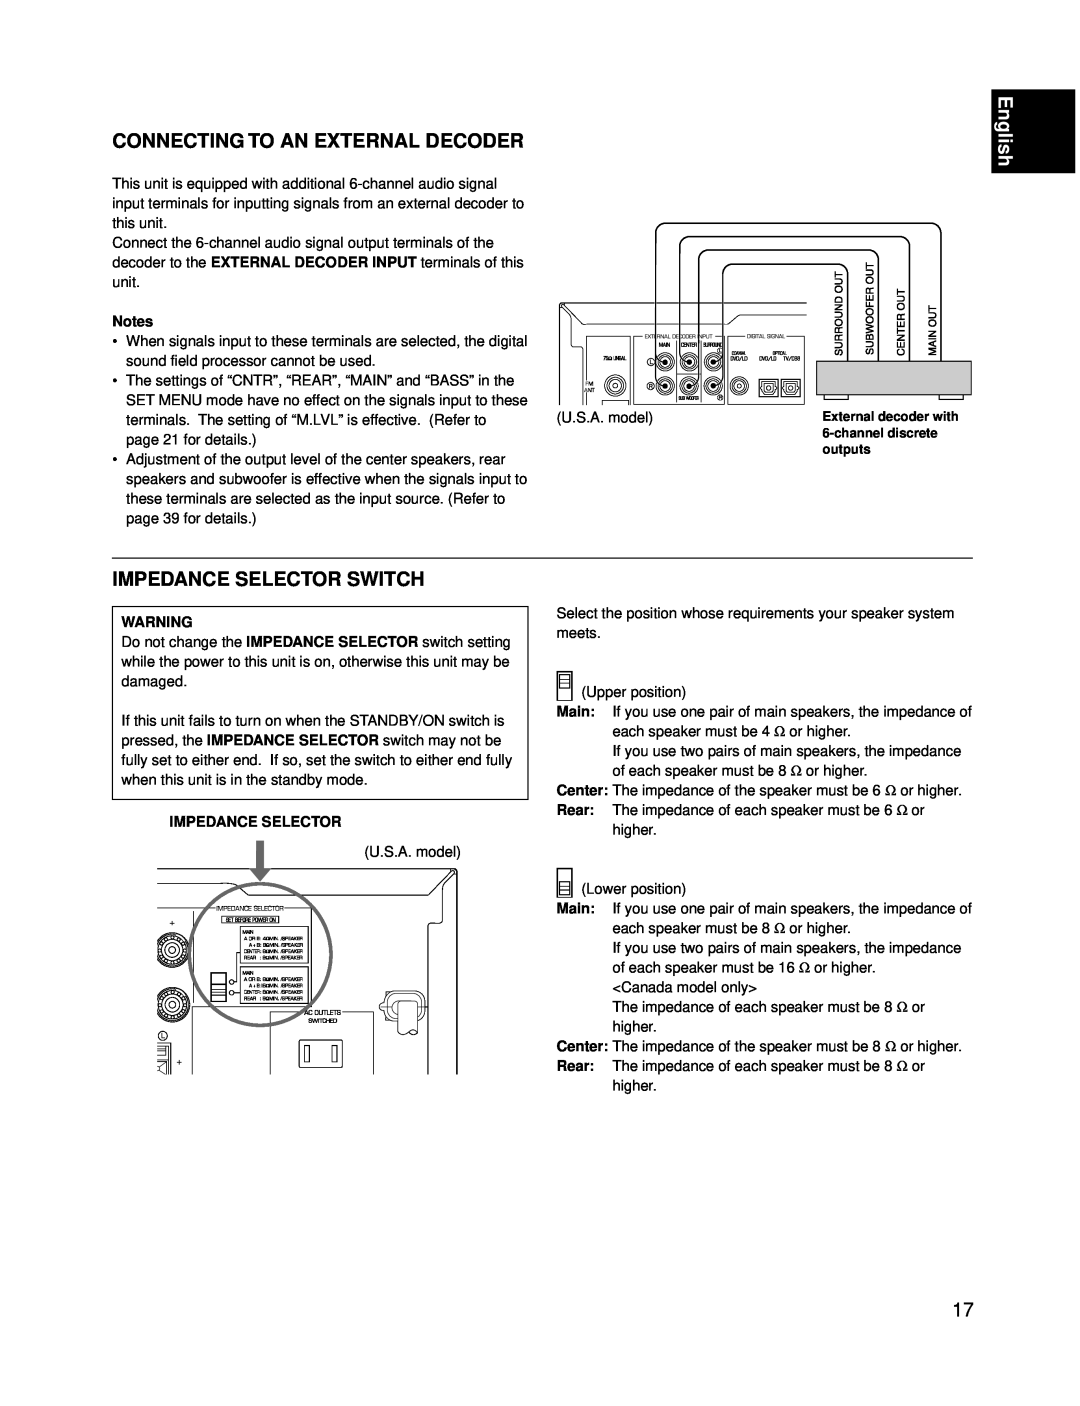 Yamaha RX-V595A owner manual Connecting To An External Decoder, Impedance Selector Switch, English 